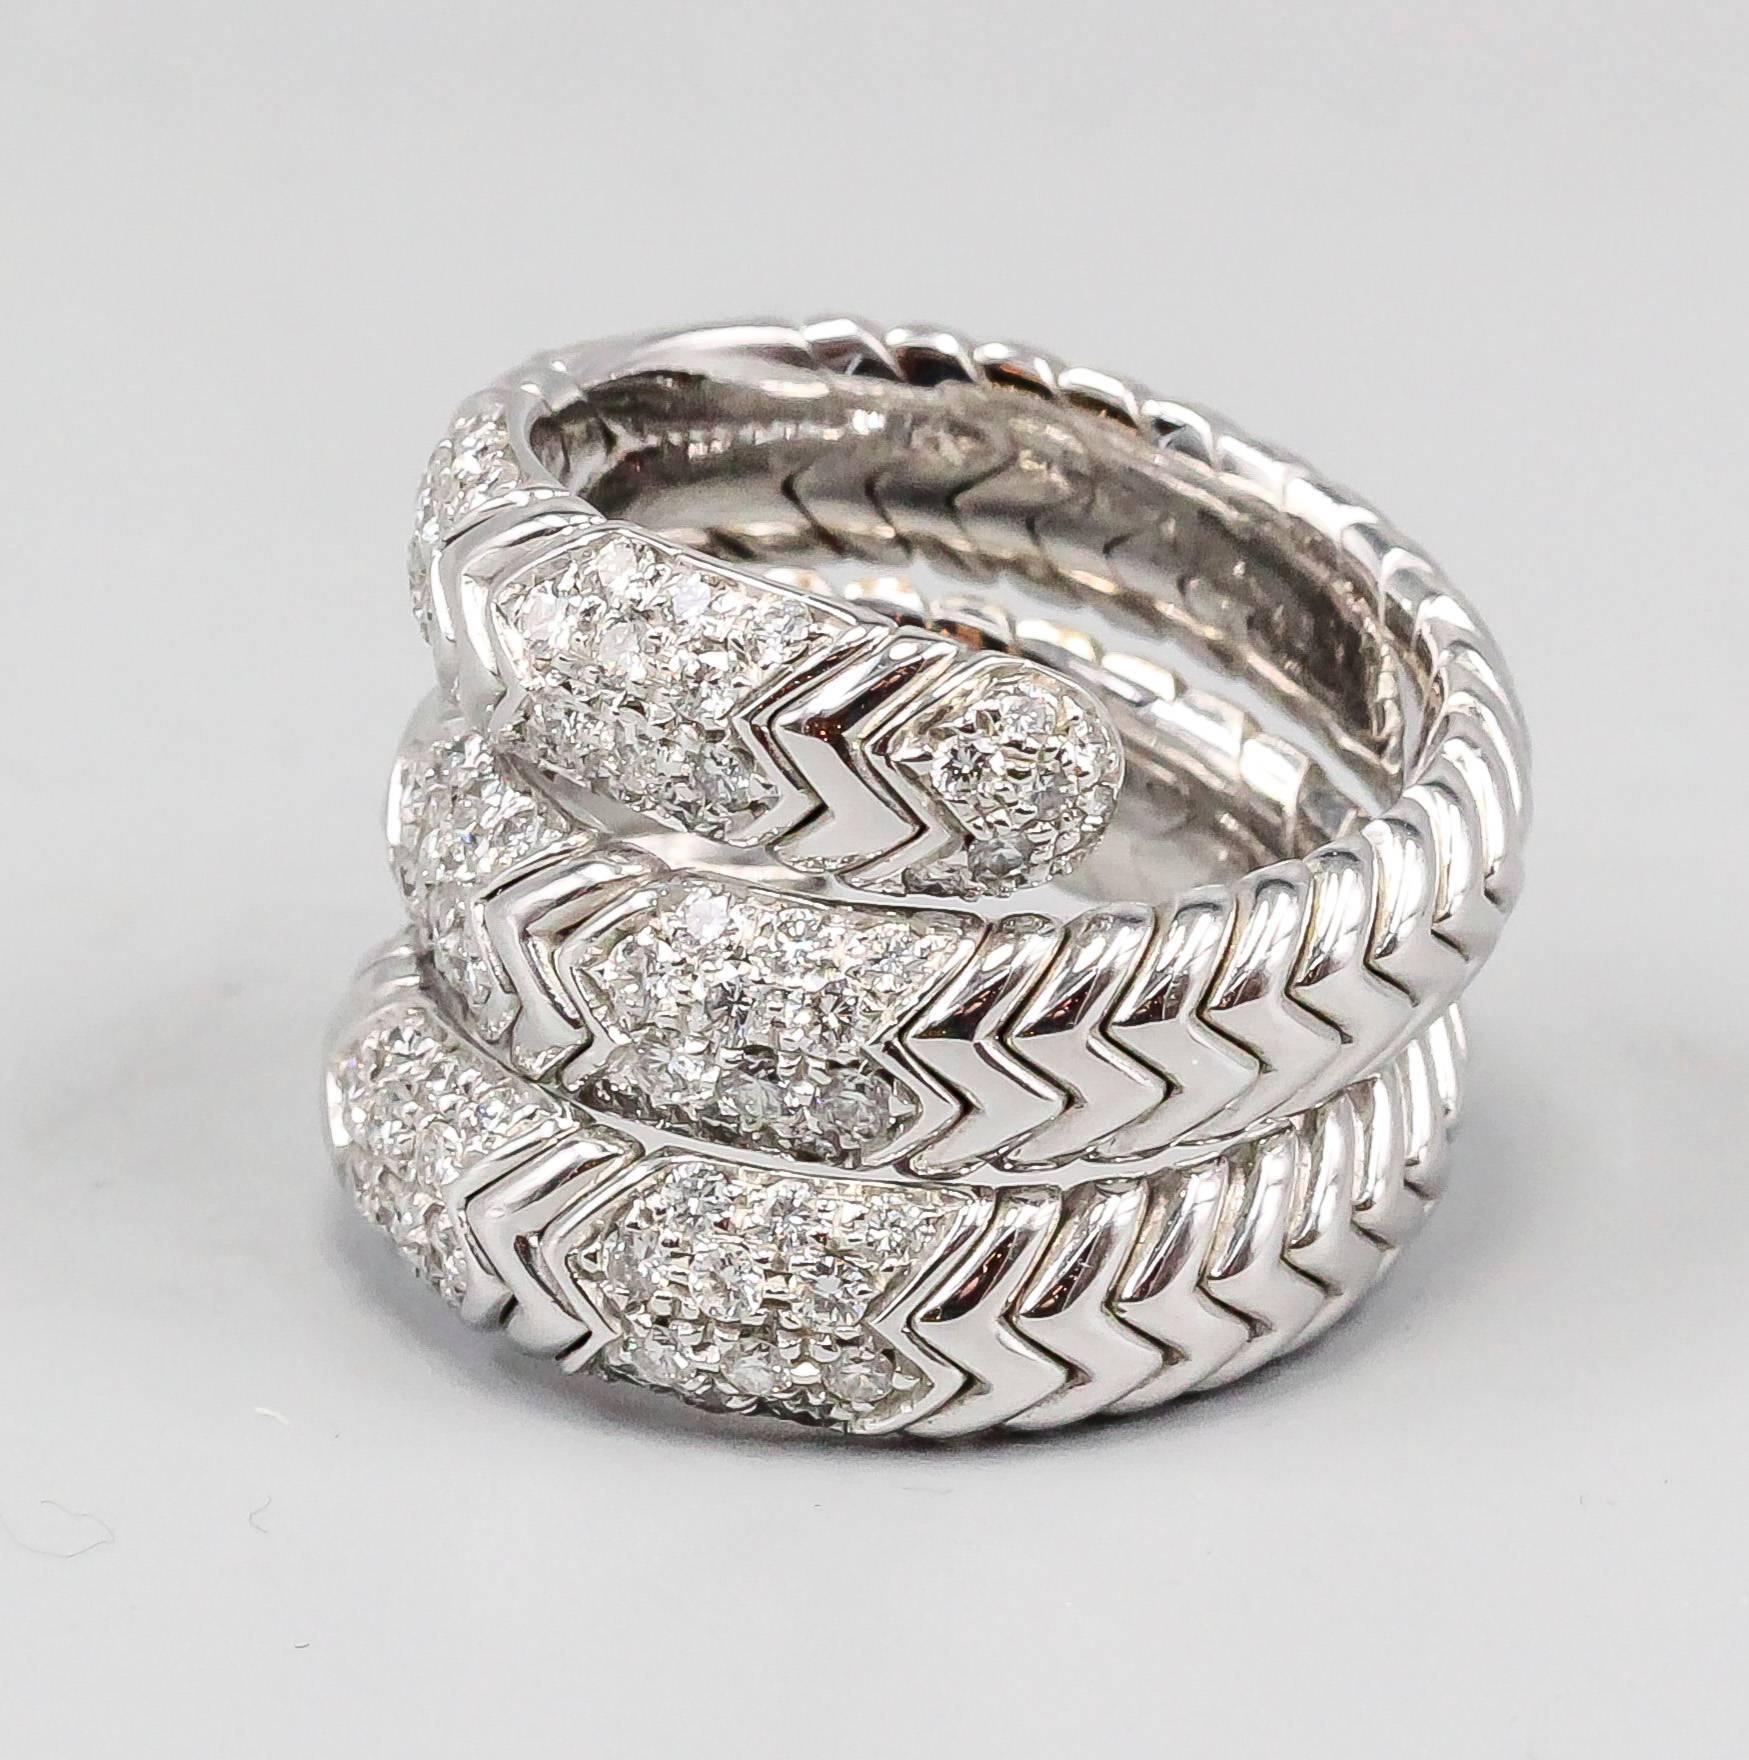 Fashionable diamond and 18K white gold flexible snake ring , from the 